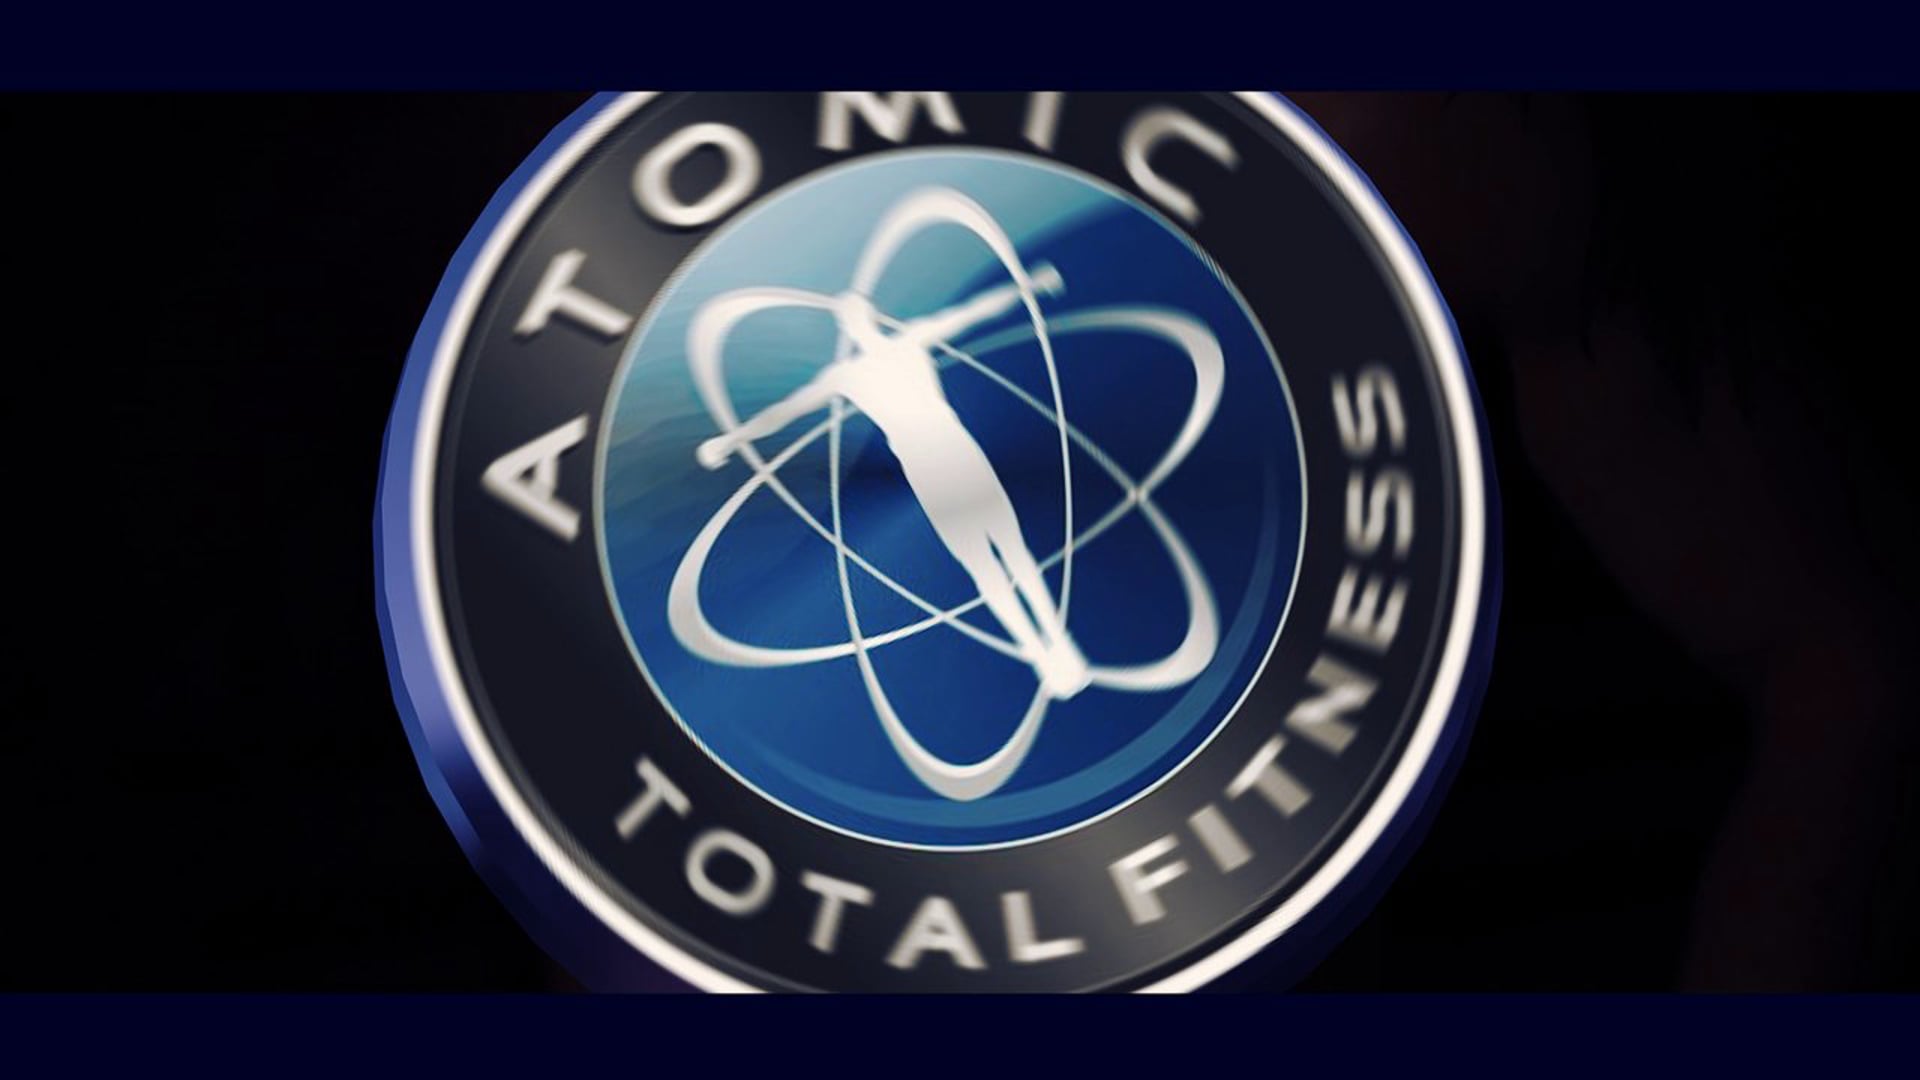 Atomic Total Fitness - title sequence - 2014